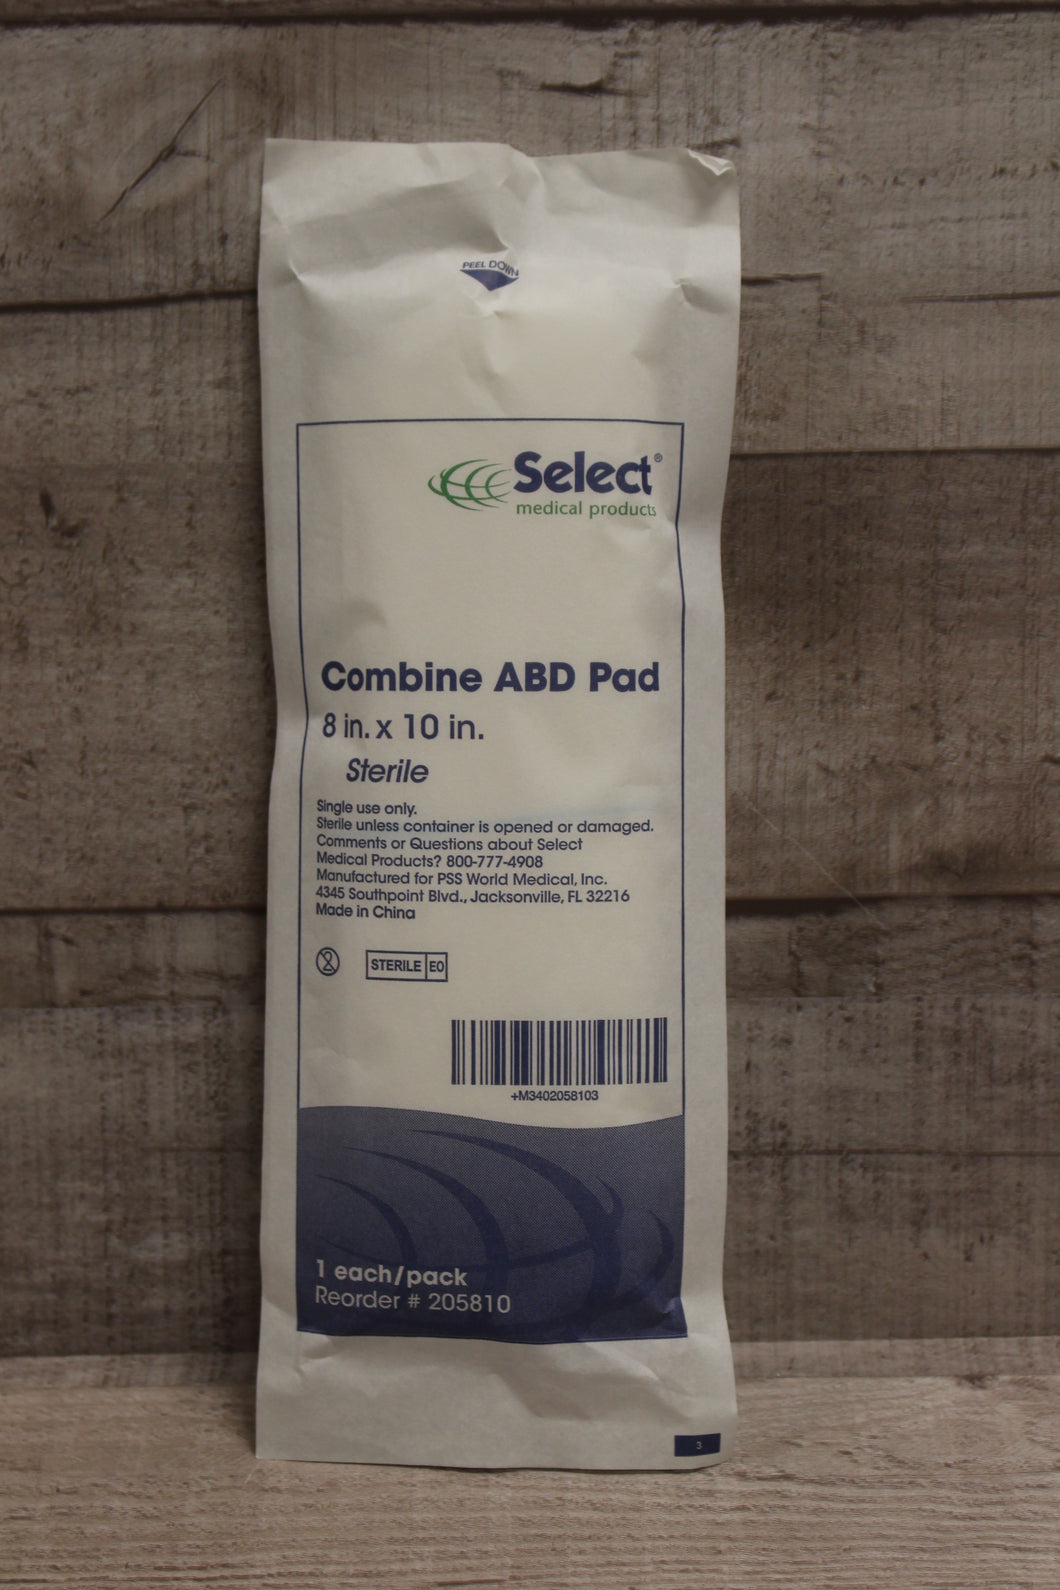 Select Medical Products Combine ABD Pad - 8